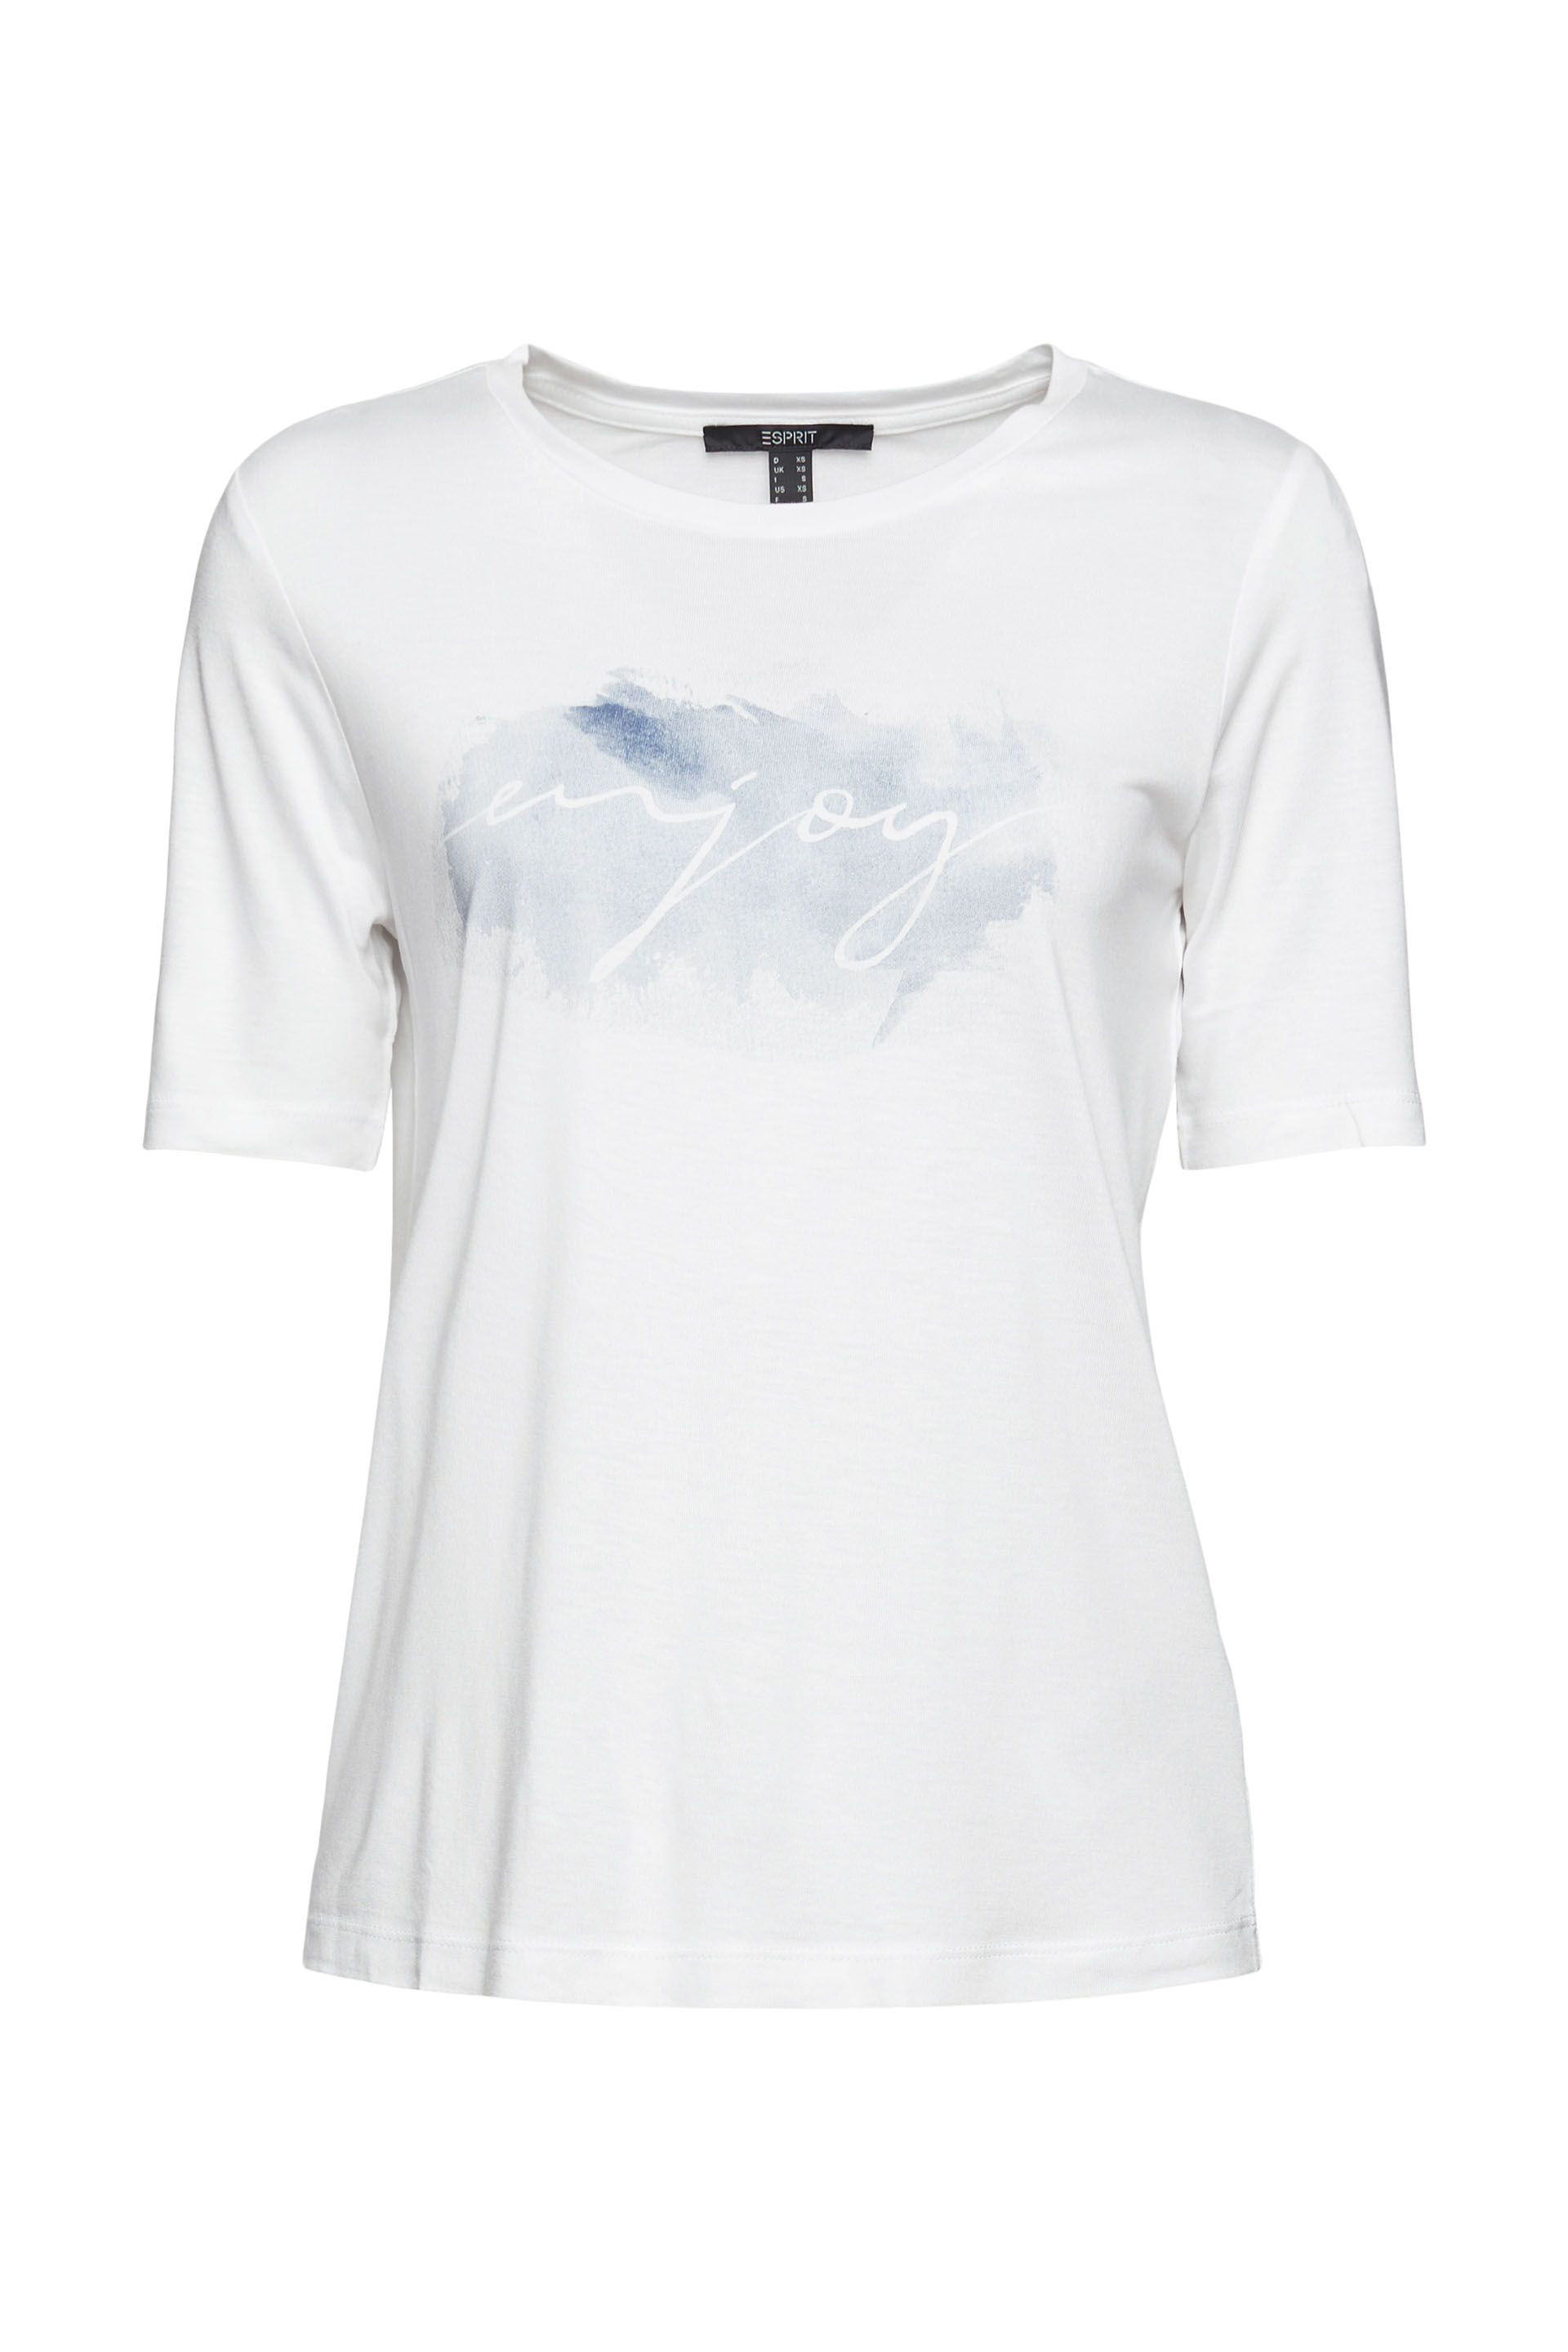 T-shirt with printed writing, White, large image number 0